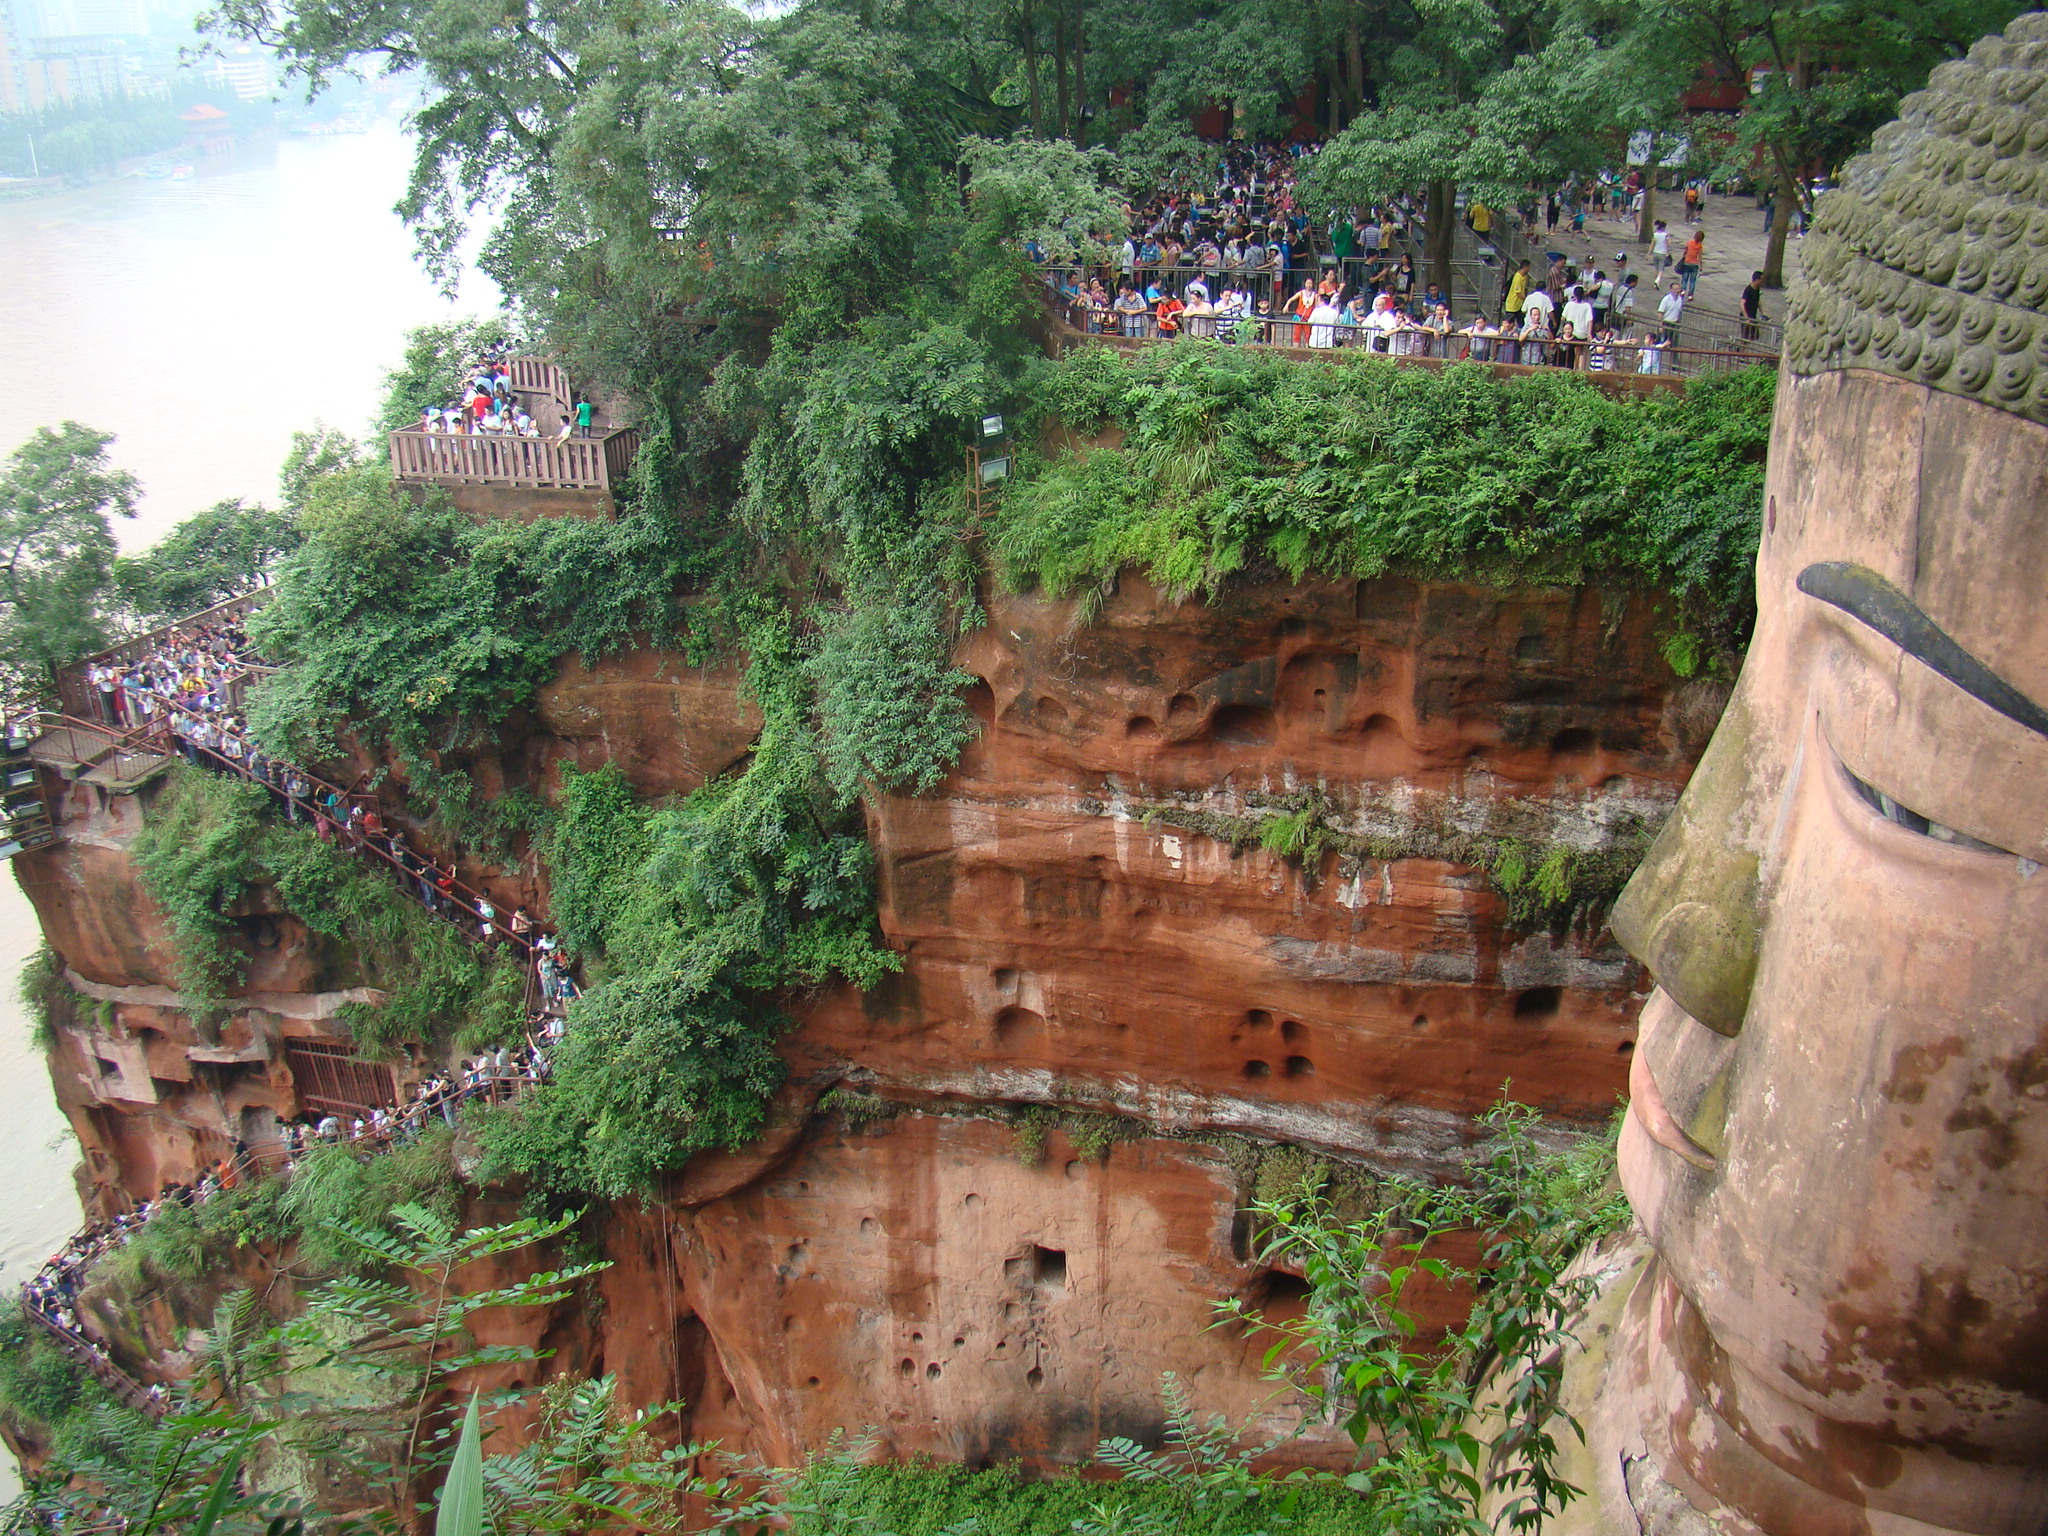 The Worlds largest Buddha and the Leshan Dafo Temple